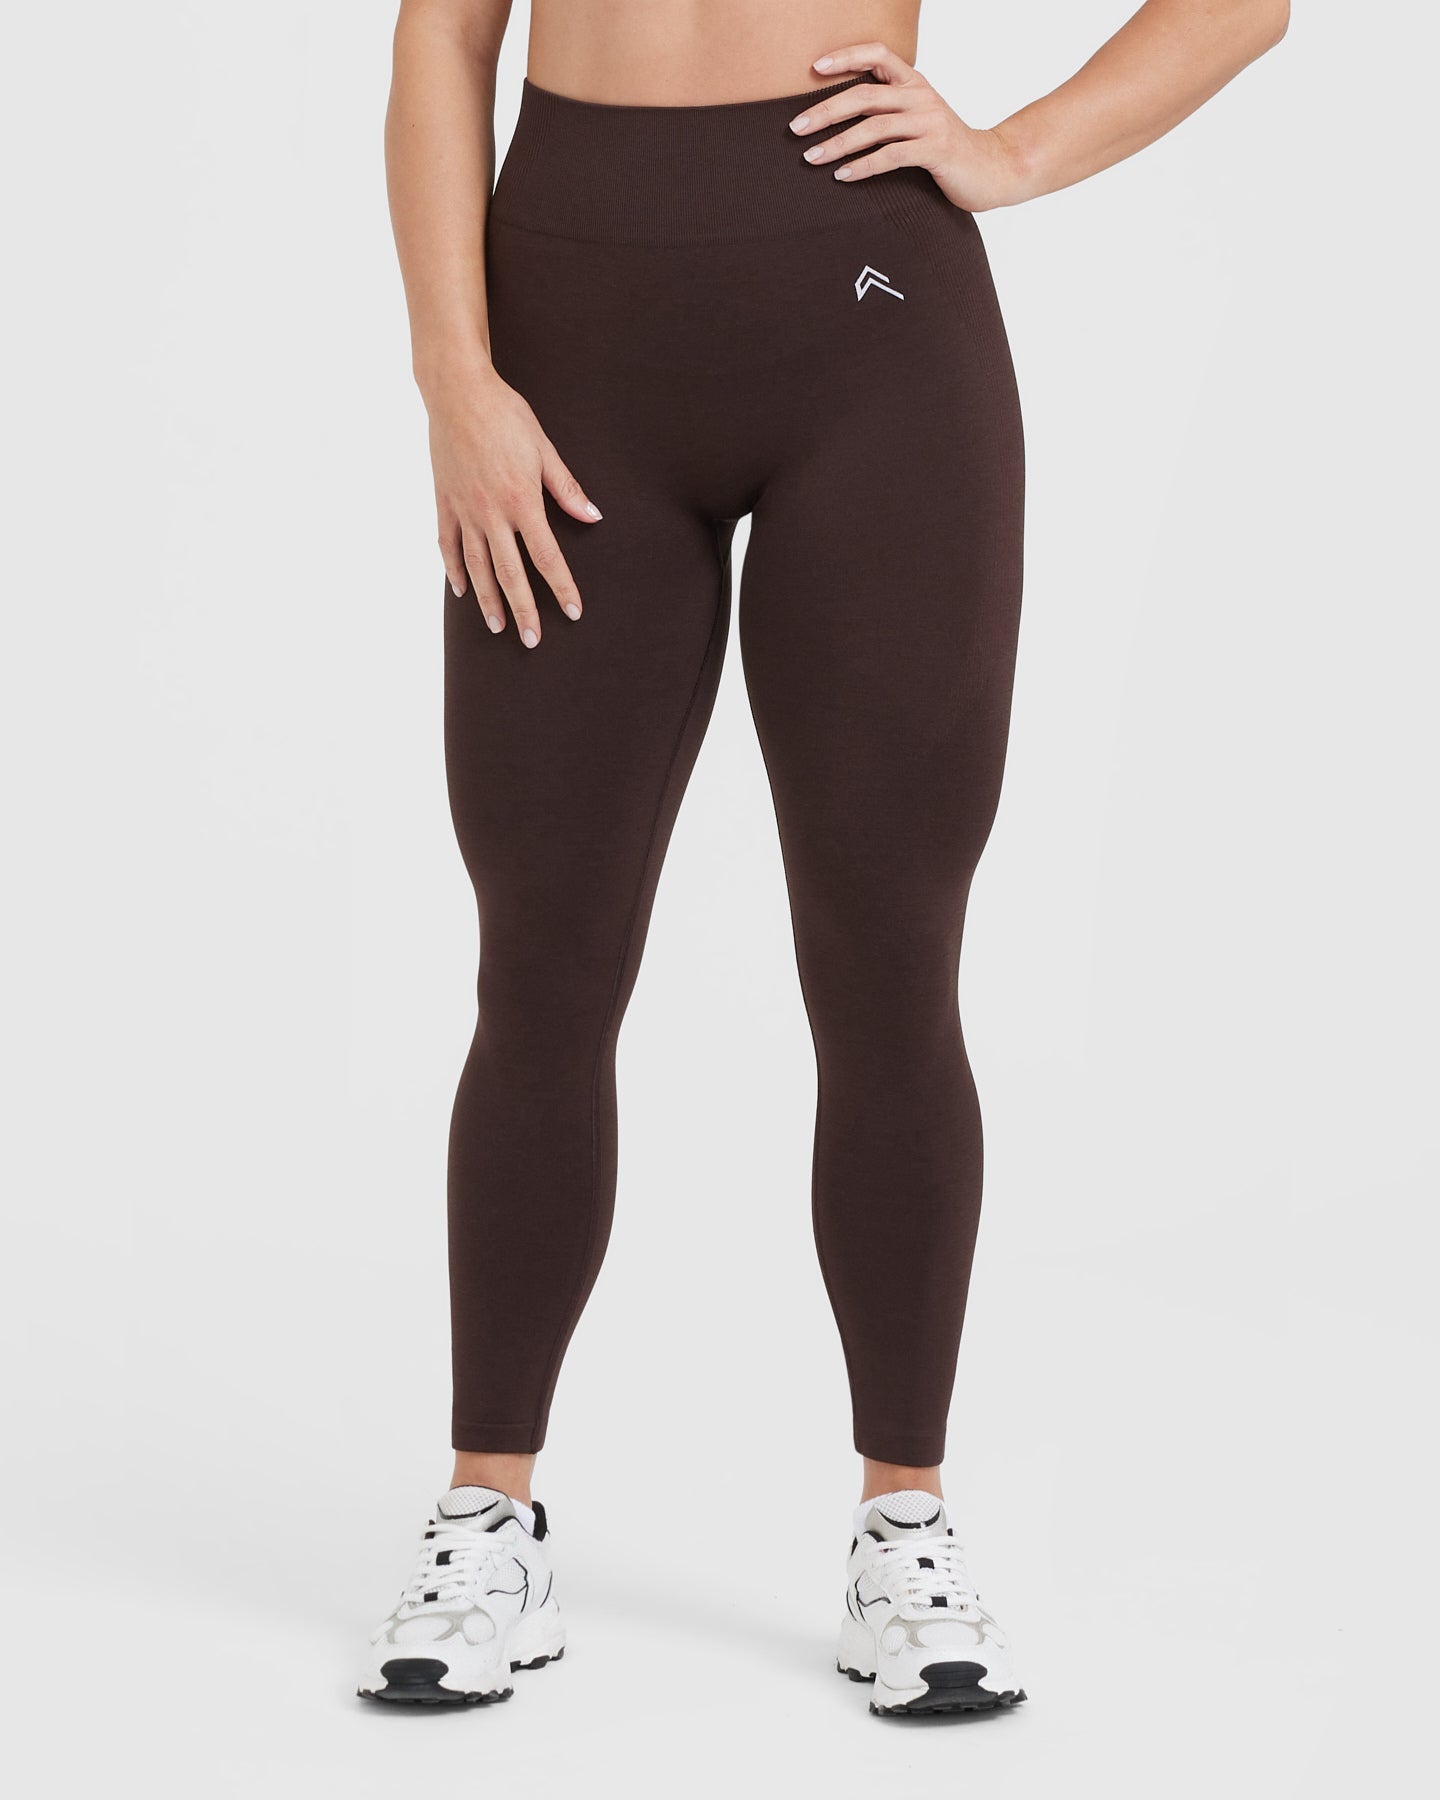 Classic Seamless 2.0 Leggings 70% Cocoa Marl | Oner Active US